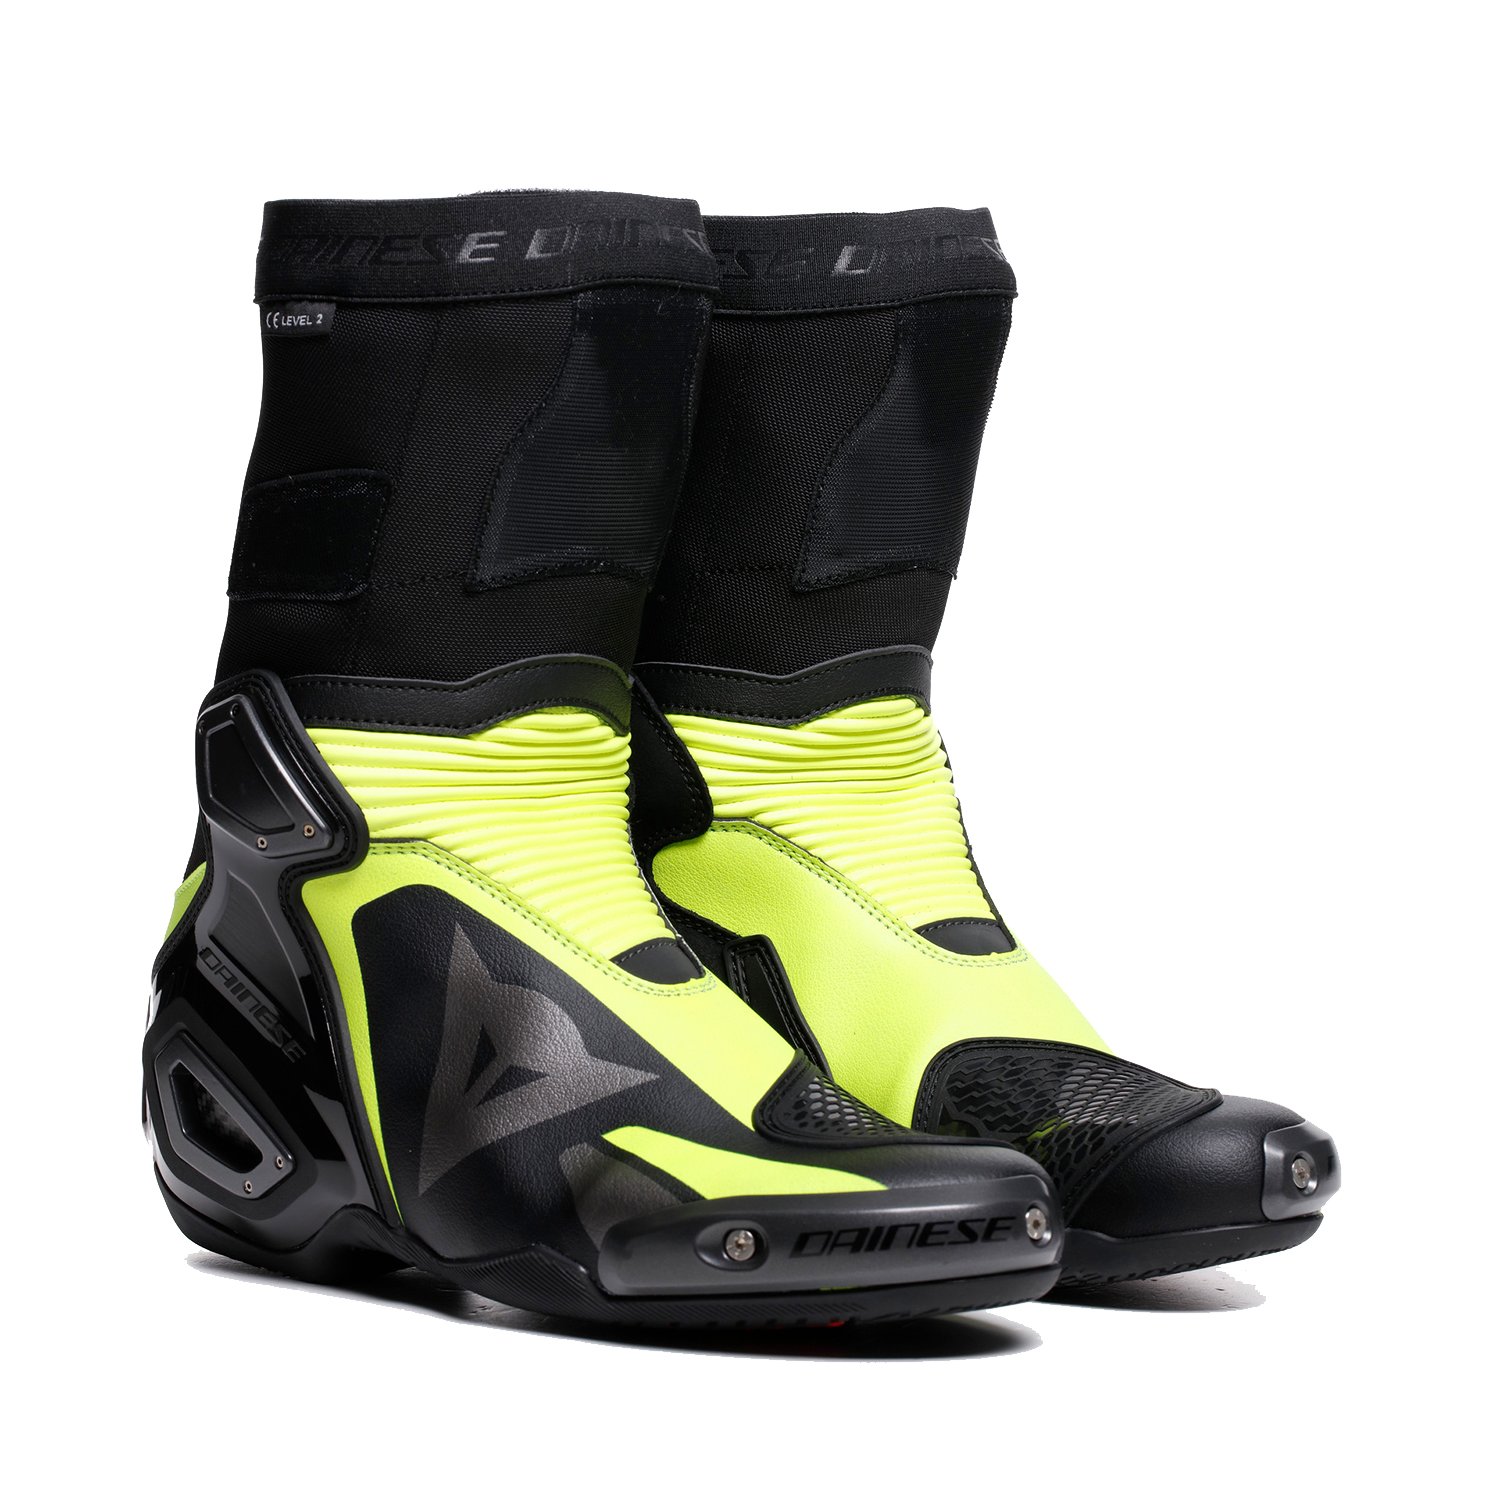 Image of Dainese Axial 2 Boots Black Yellow Fluo Talla 46